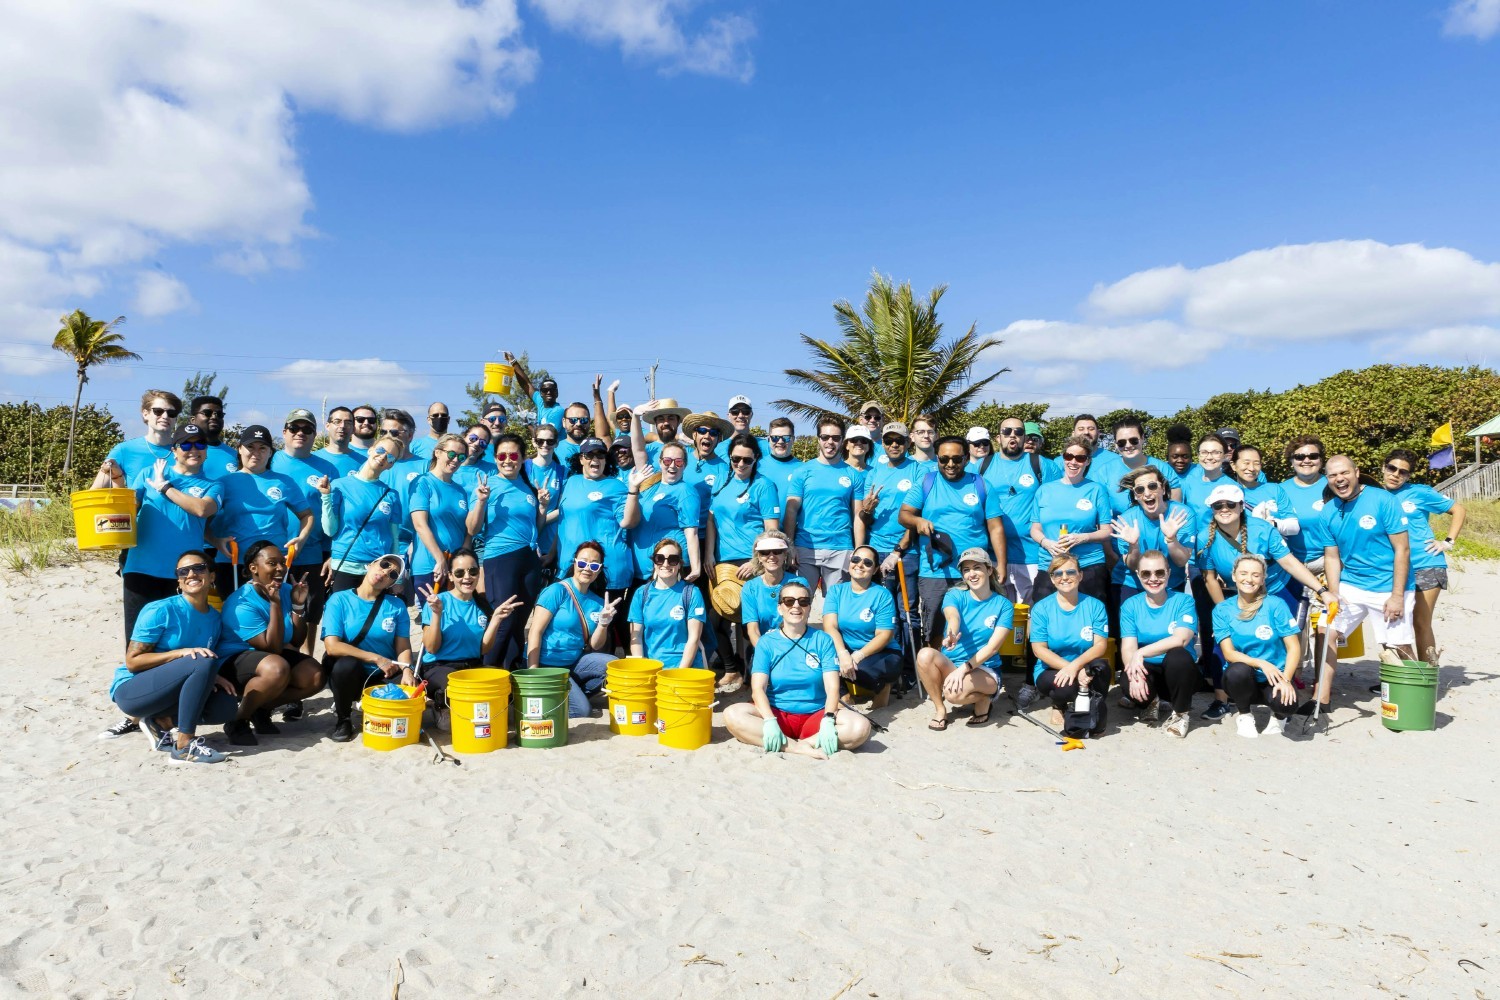 MDVIP community went out in droves to participate in the beach cleanup, removing tons of trash.